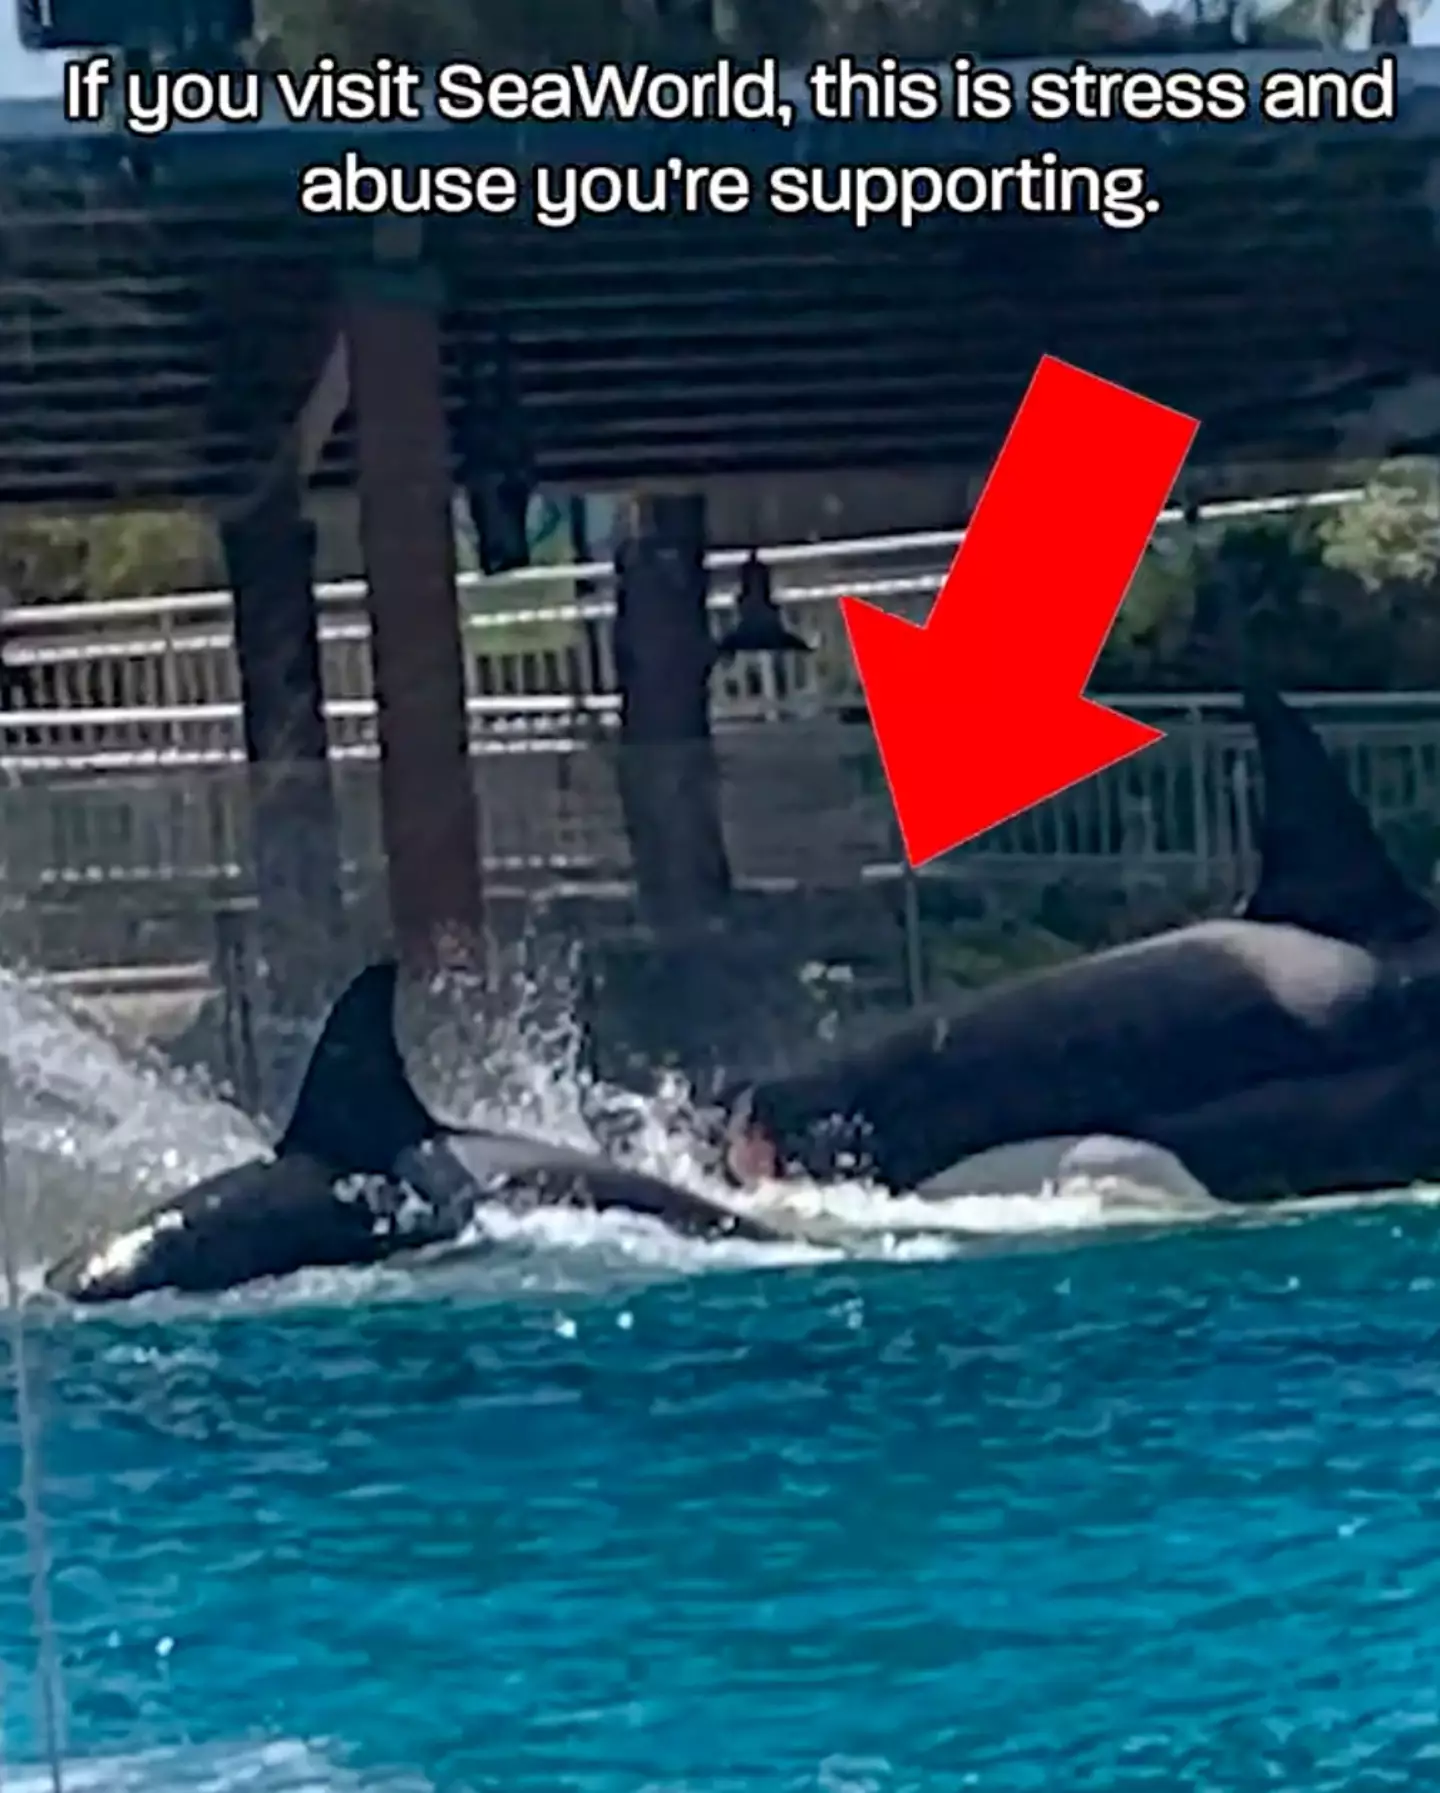 A spokesperson for SeaWorld has claimed the footage is 'misleading'.